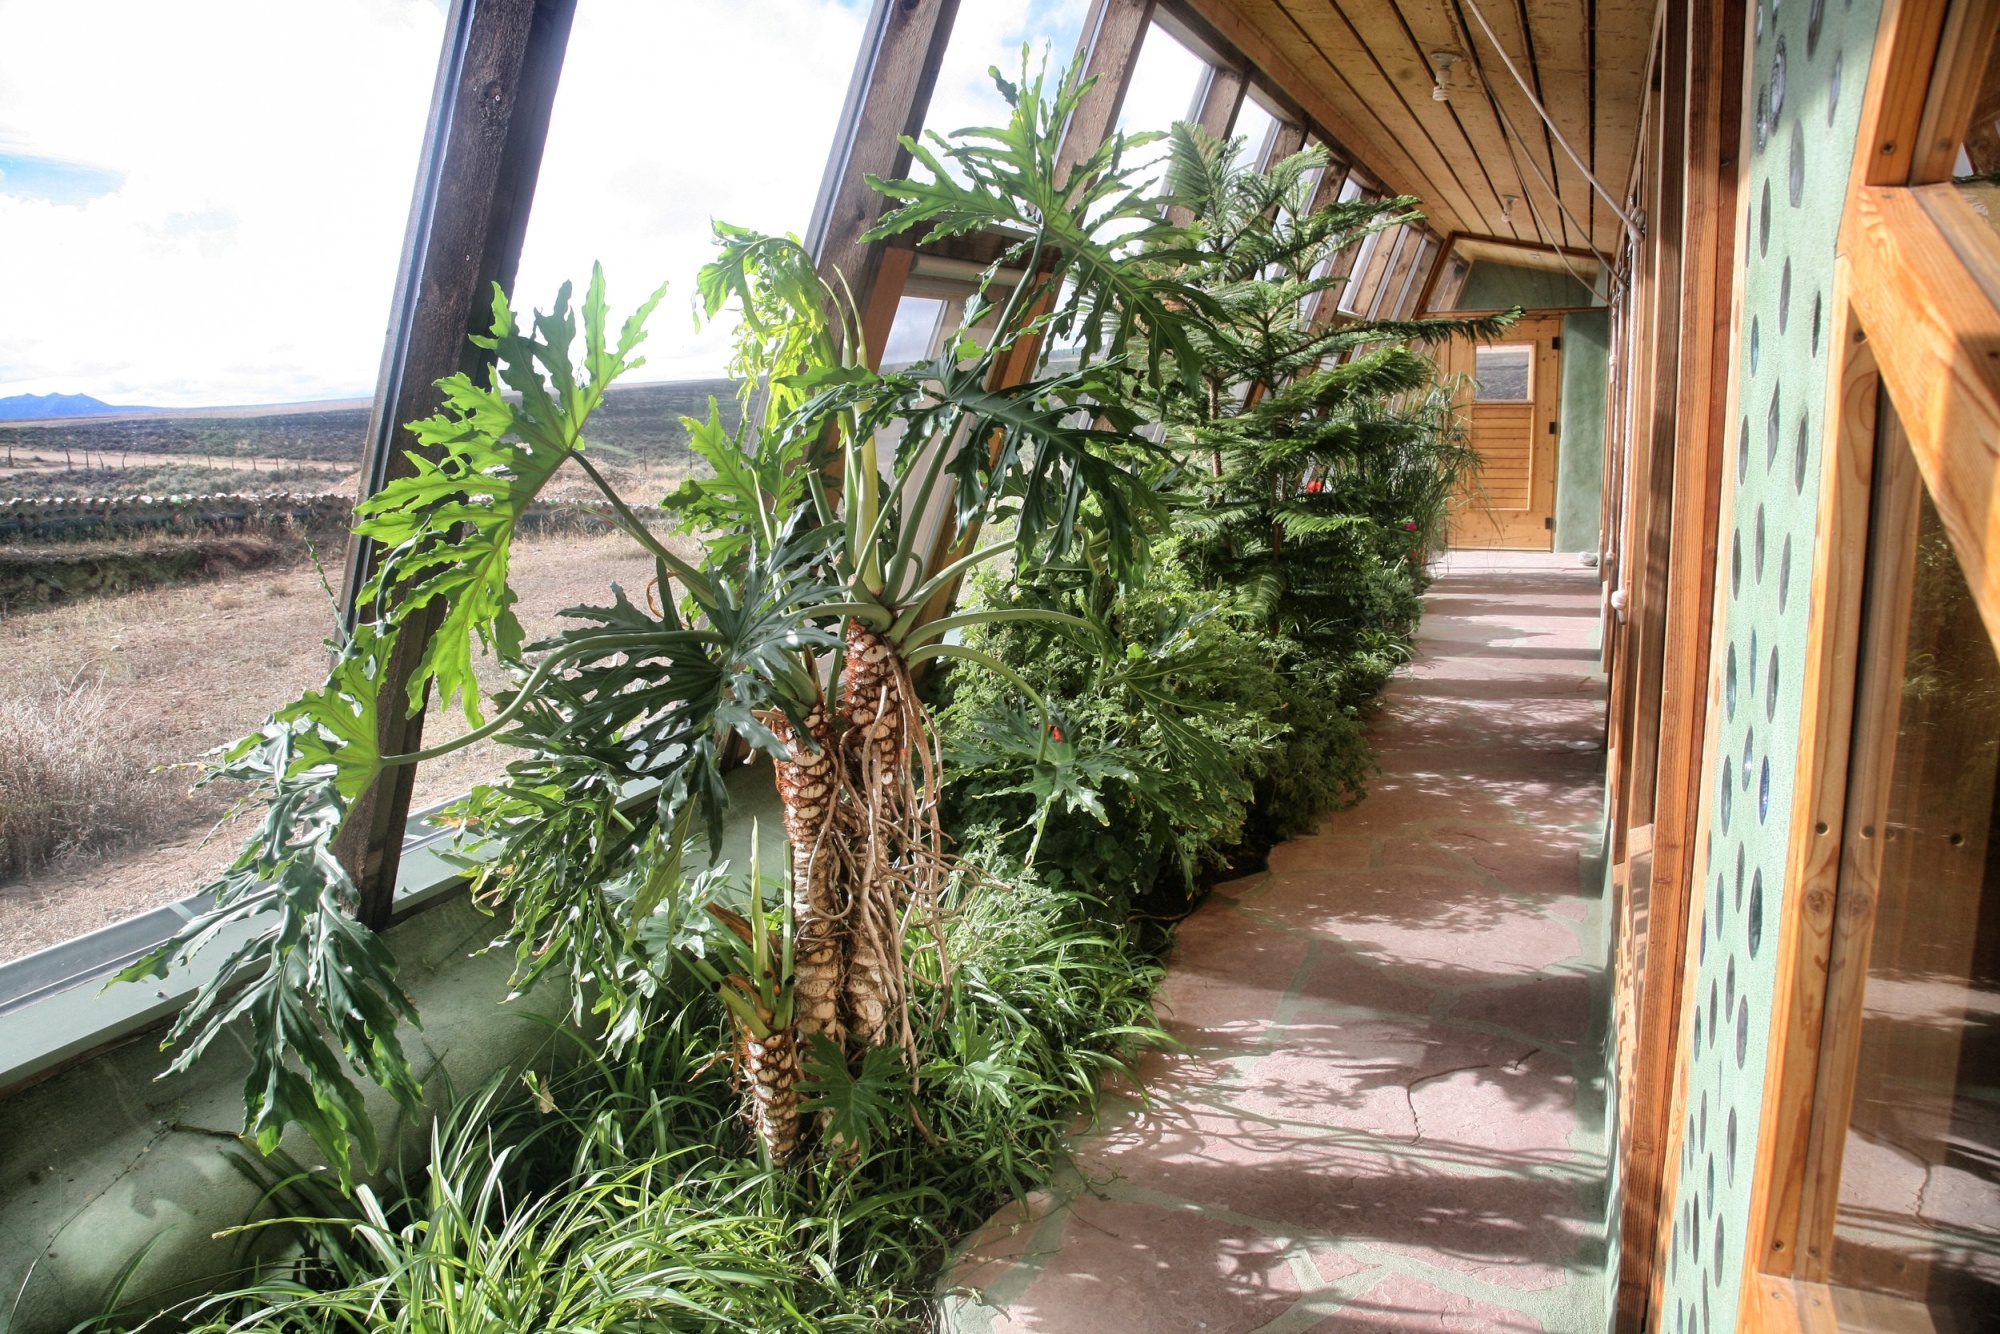  Earthship  A new sustainable way of life